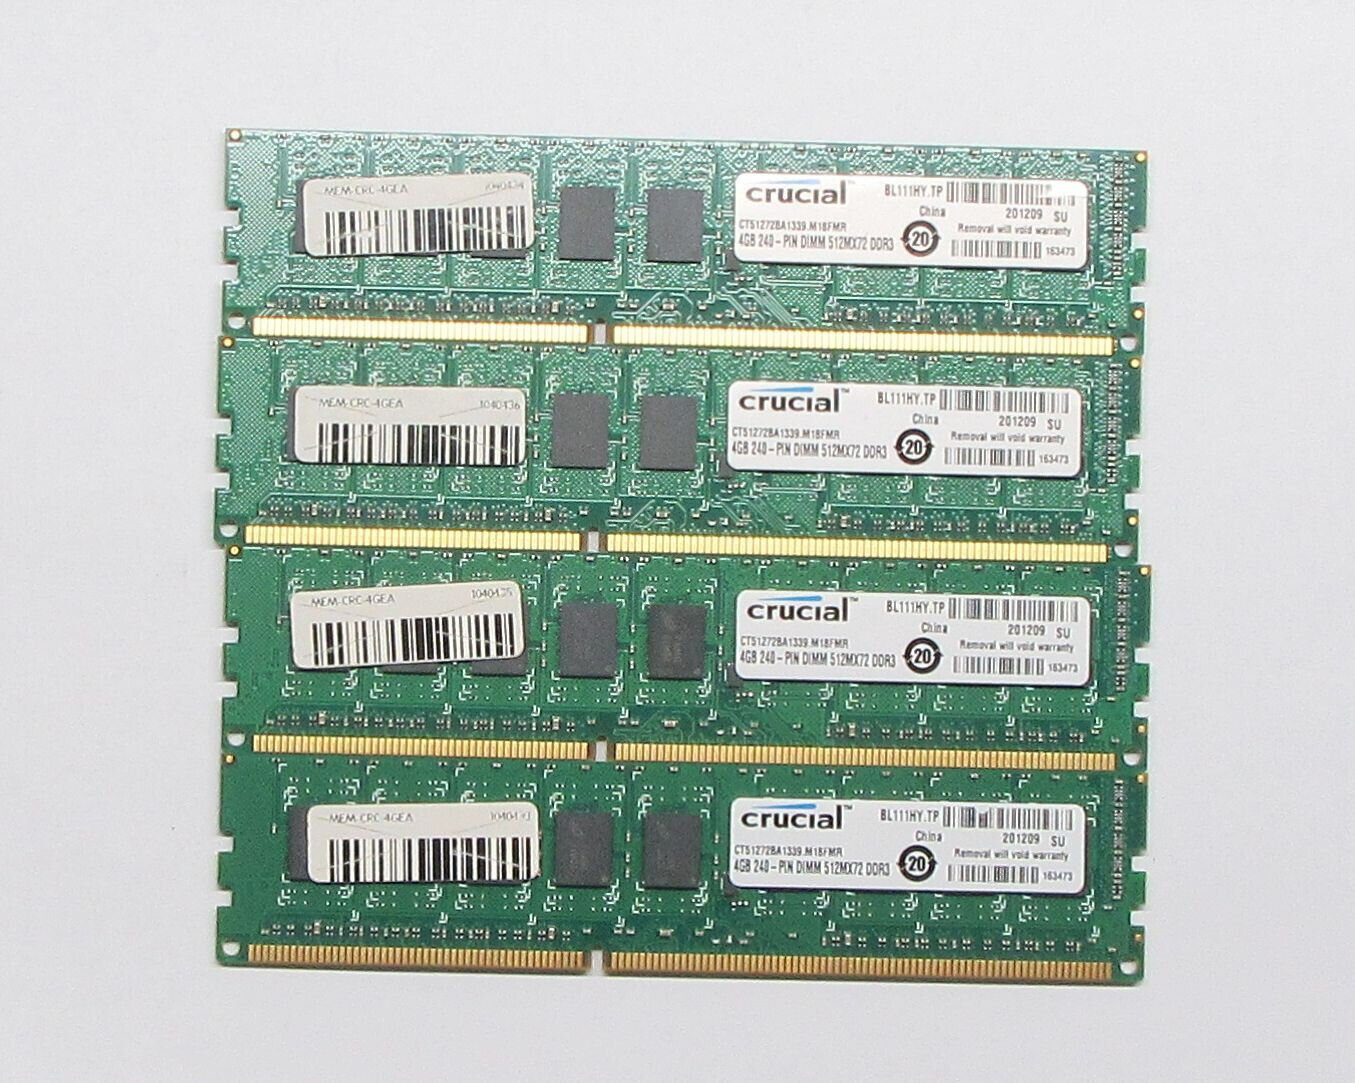 16GB (4x 4GB) Crucial DDR3 512Mx72 Server RAM for Supermicro X9SCL-F Motherboard